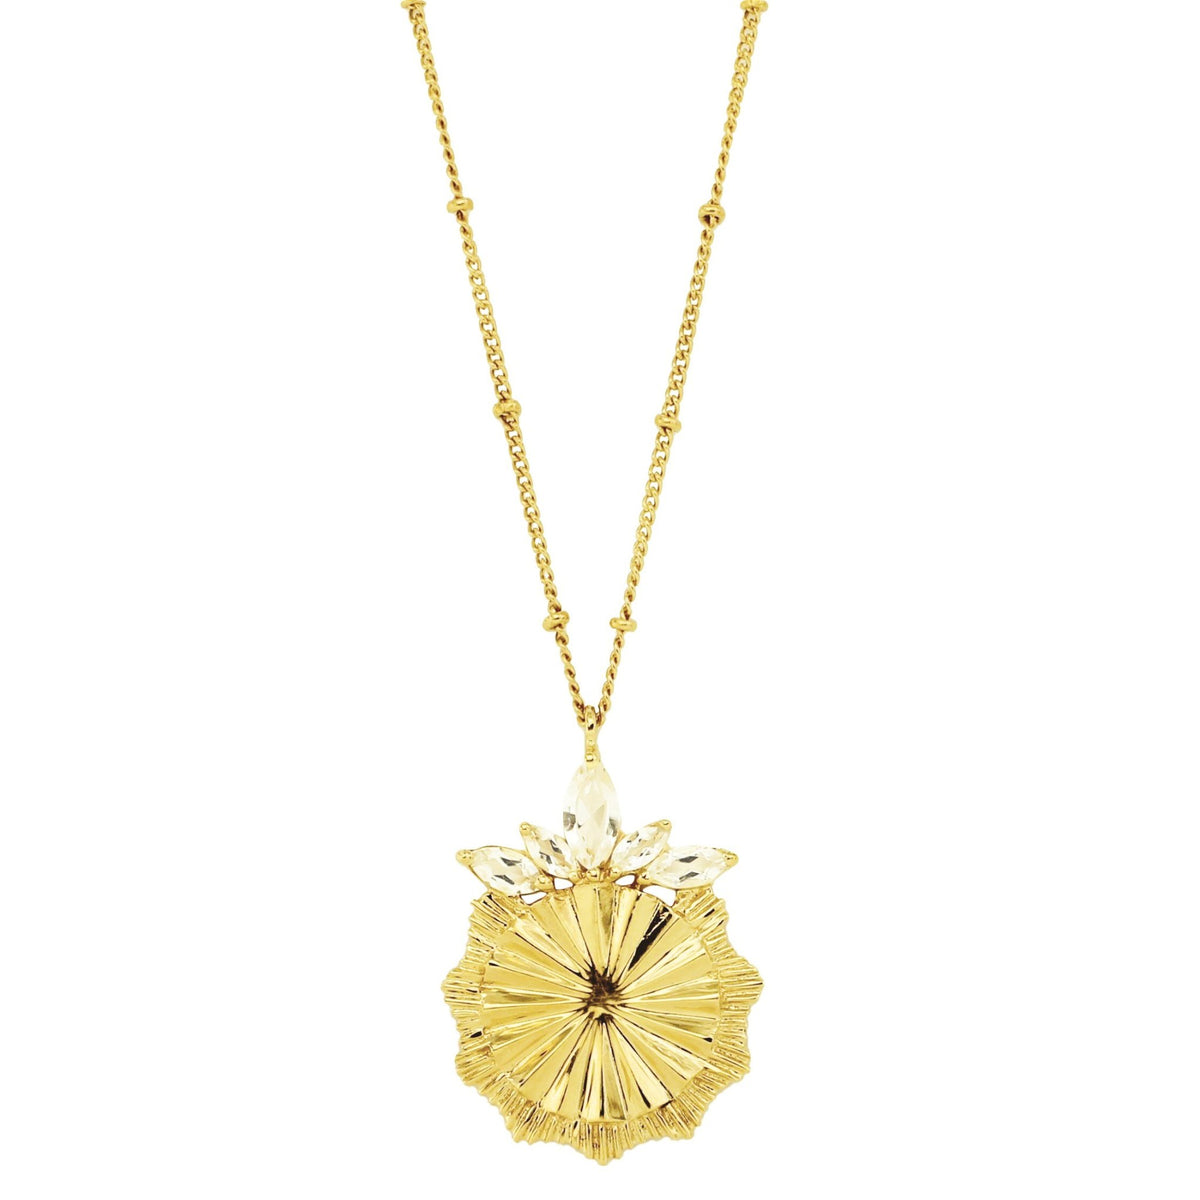 BELIEVE SOLEIL PENDANT NECKLACE - WHITE TOPAZ &amp; GOLD - SO PRETTY CARA COTTER